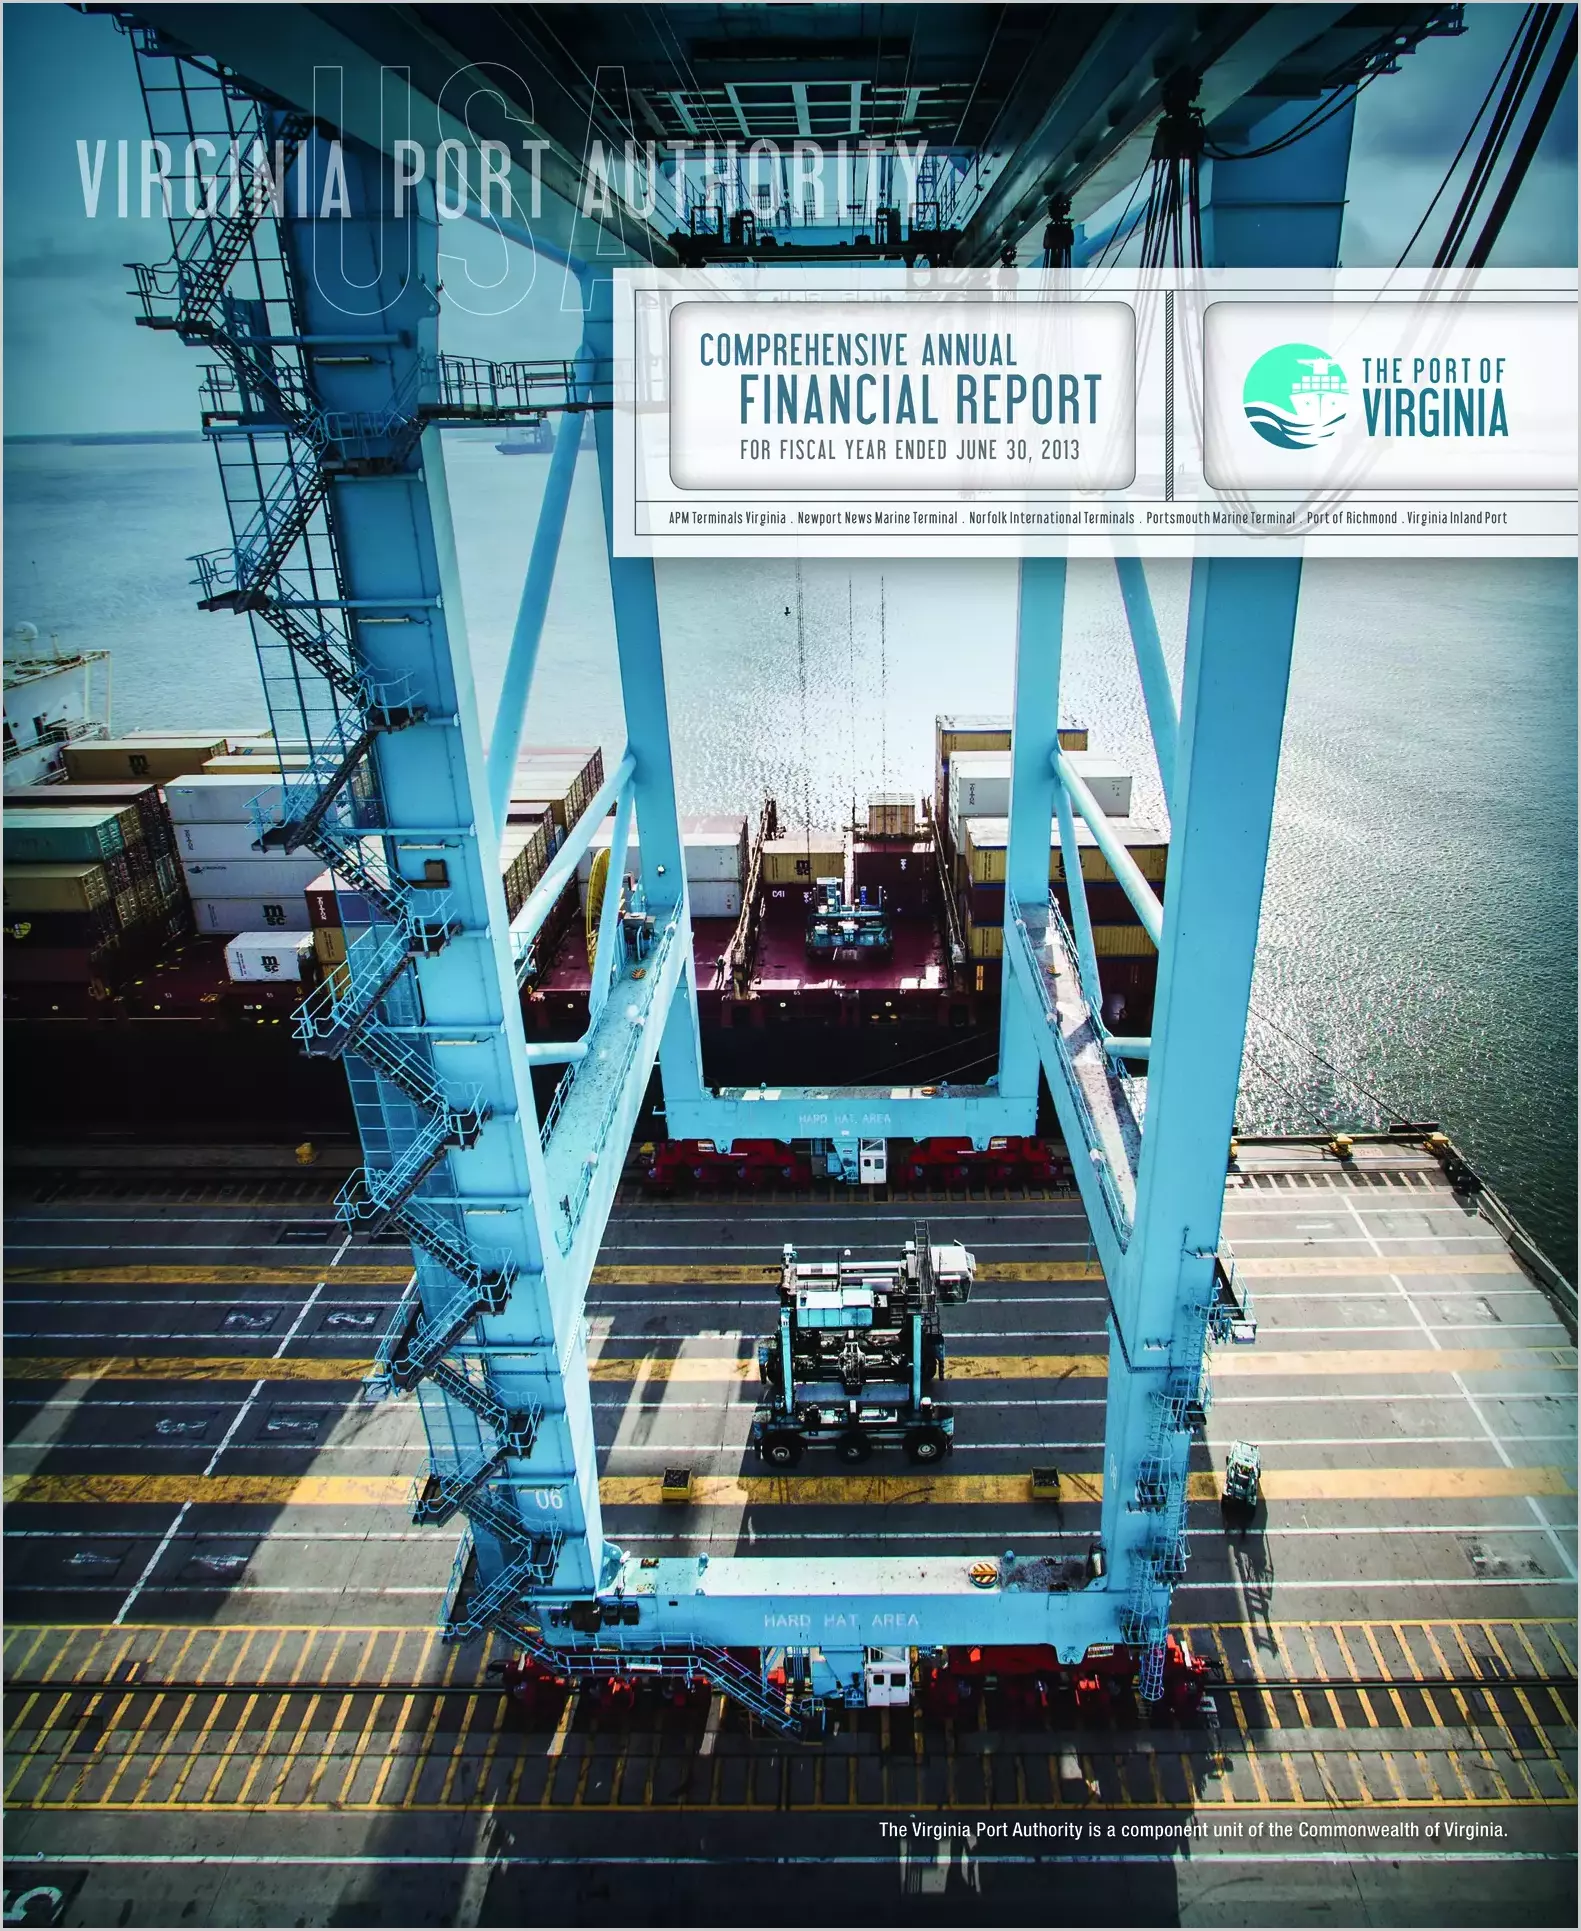 Virginia Port Authority Financial Statements Report for the year ended June 30, 2013